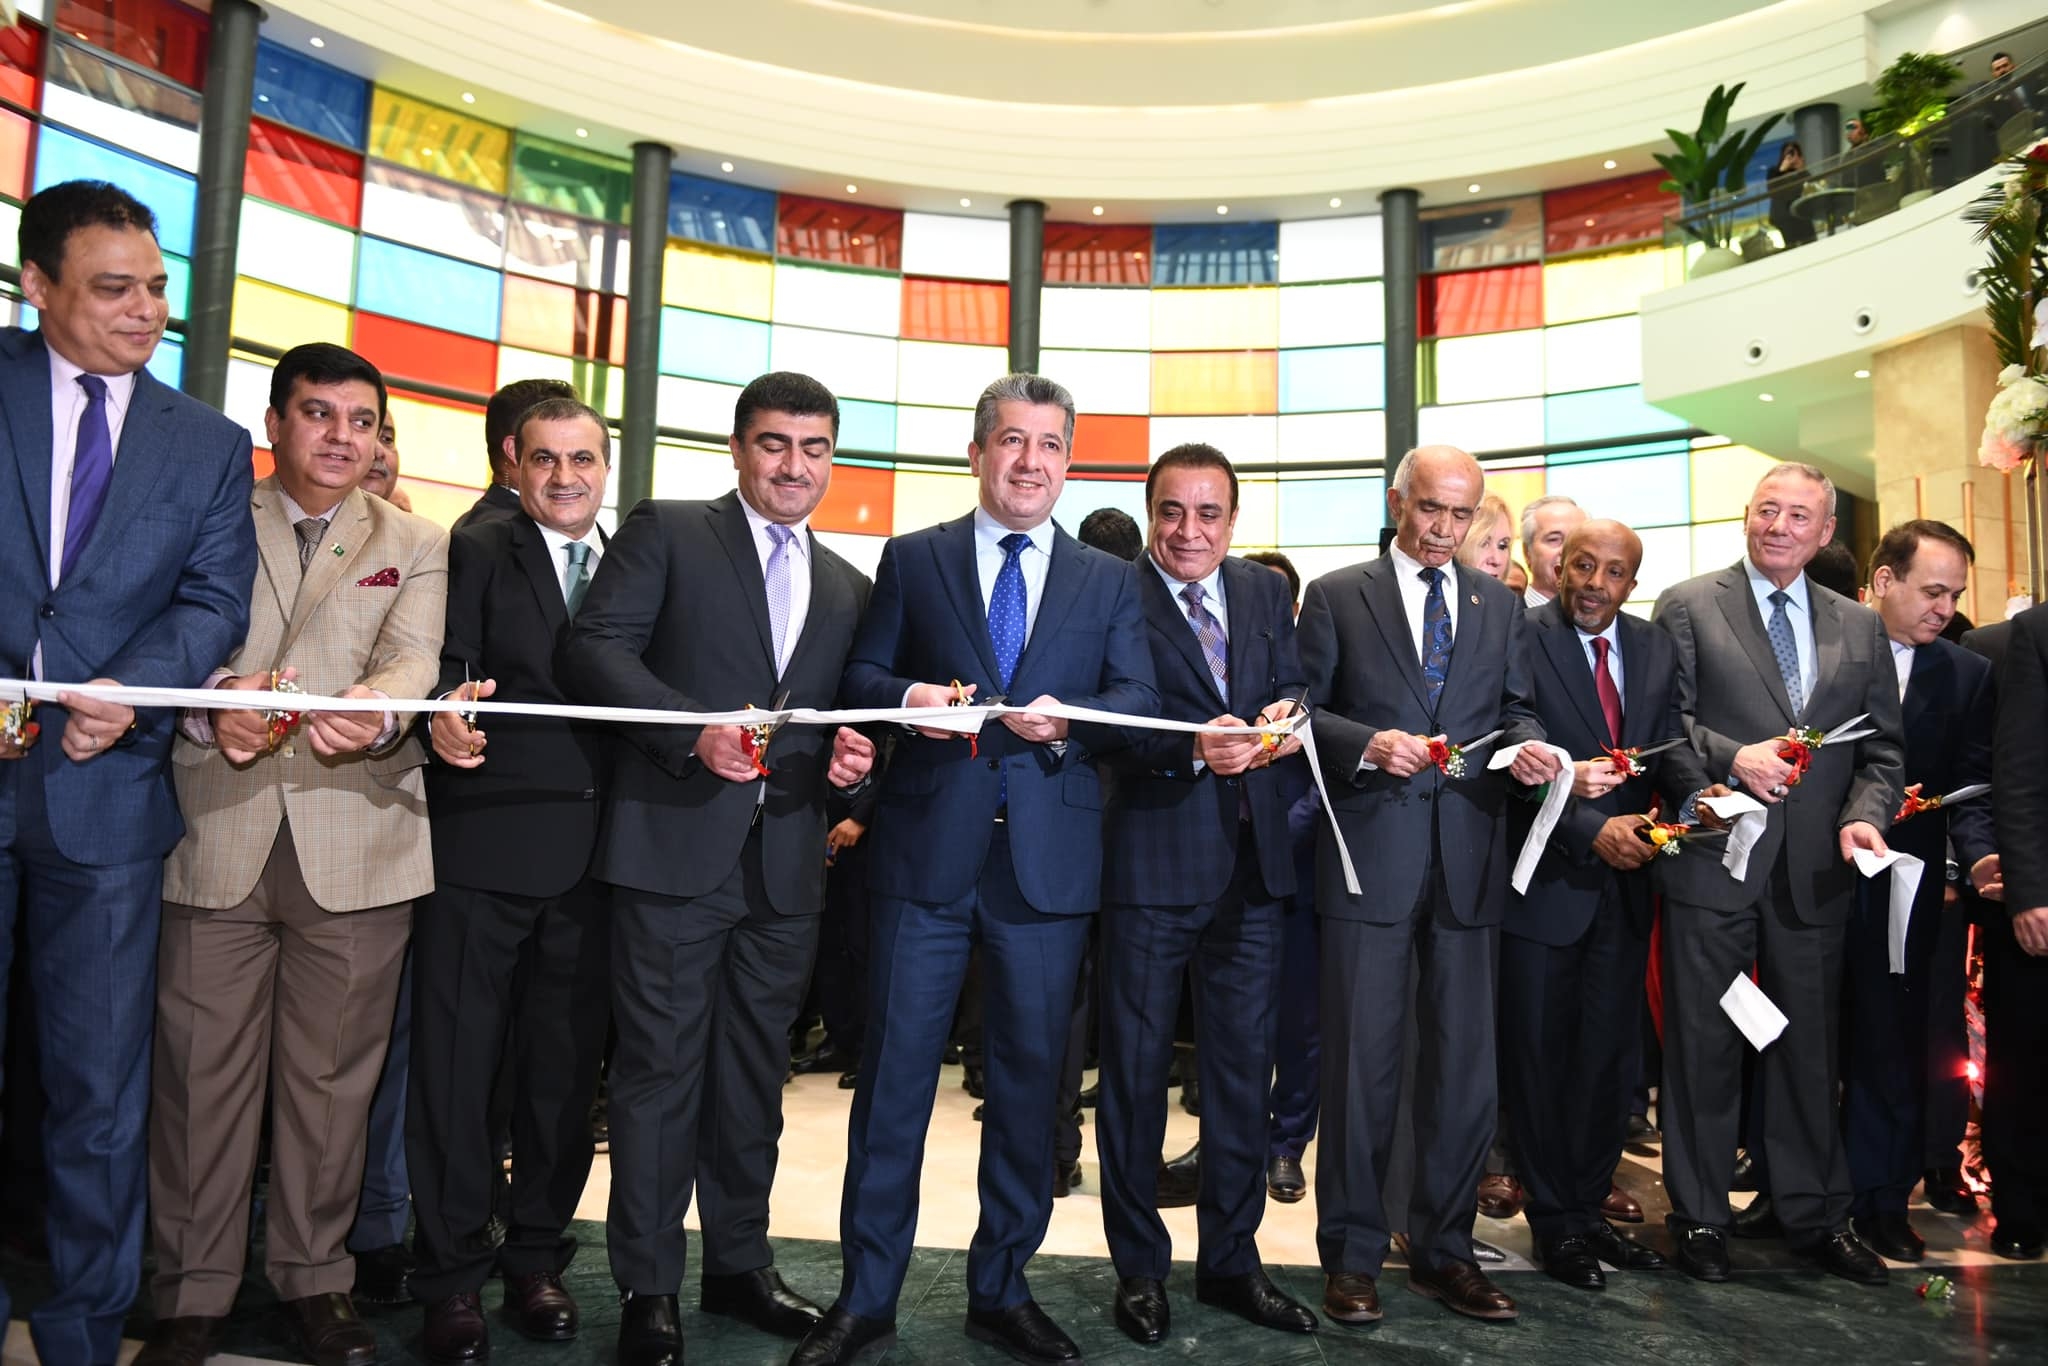 PM Barzani has officially opened a luxurious American hotel franchise in Erbil